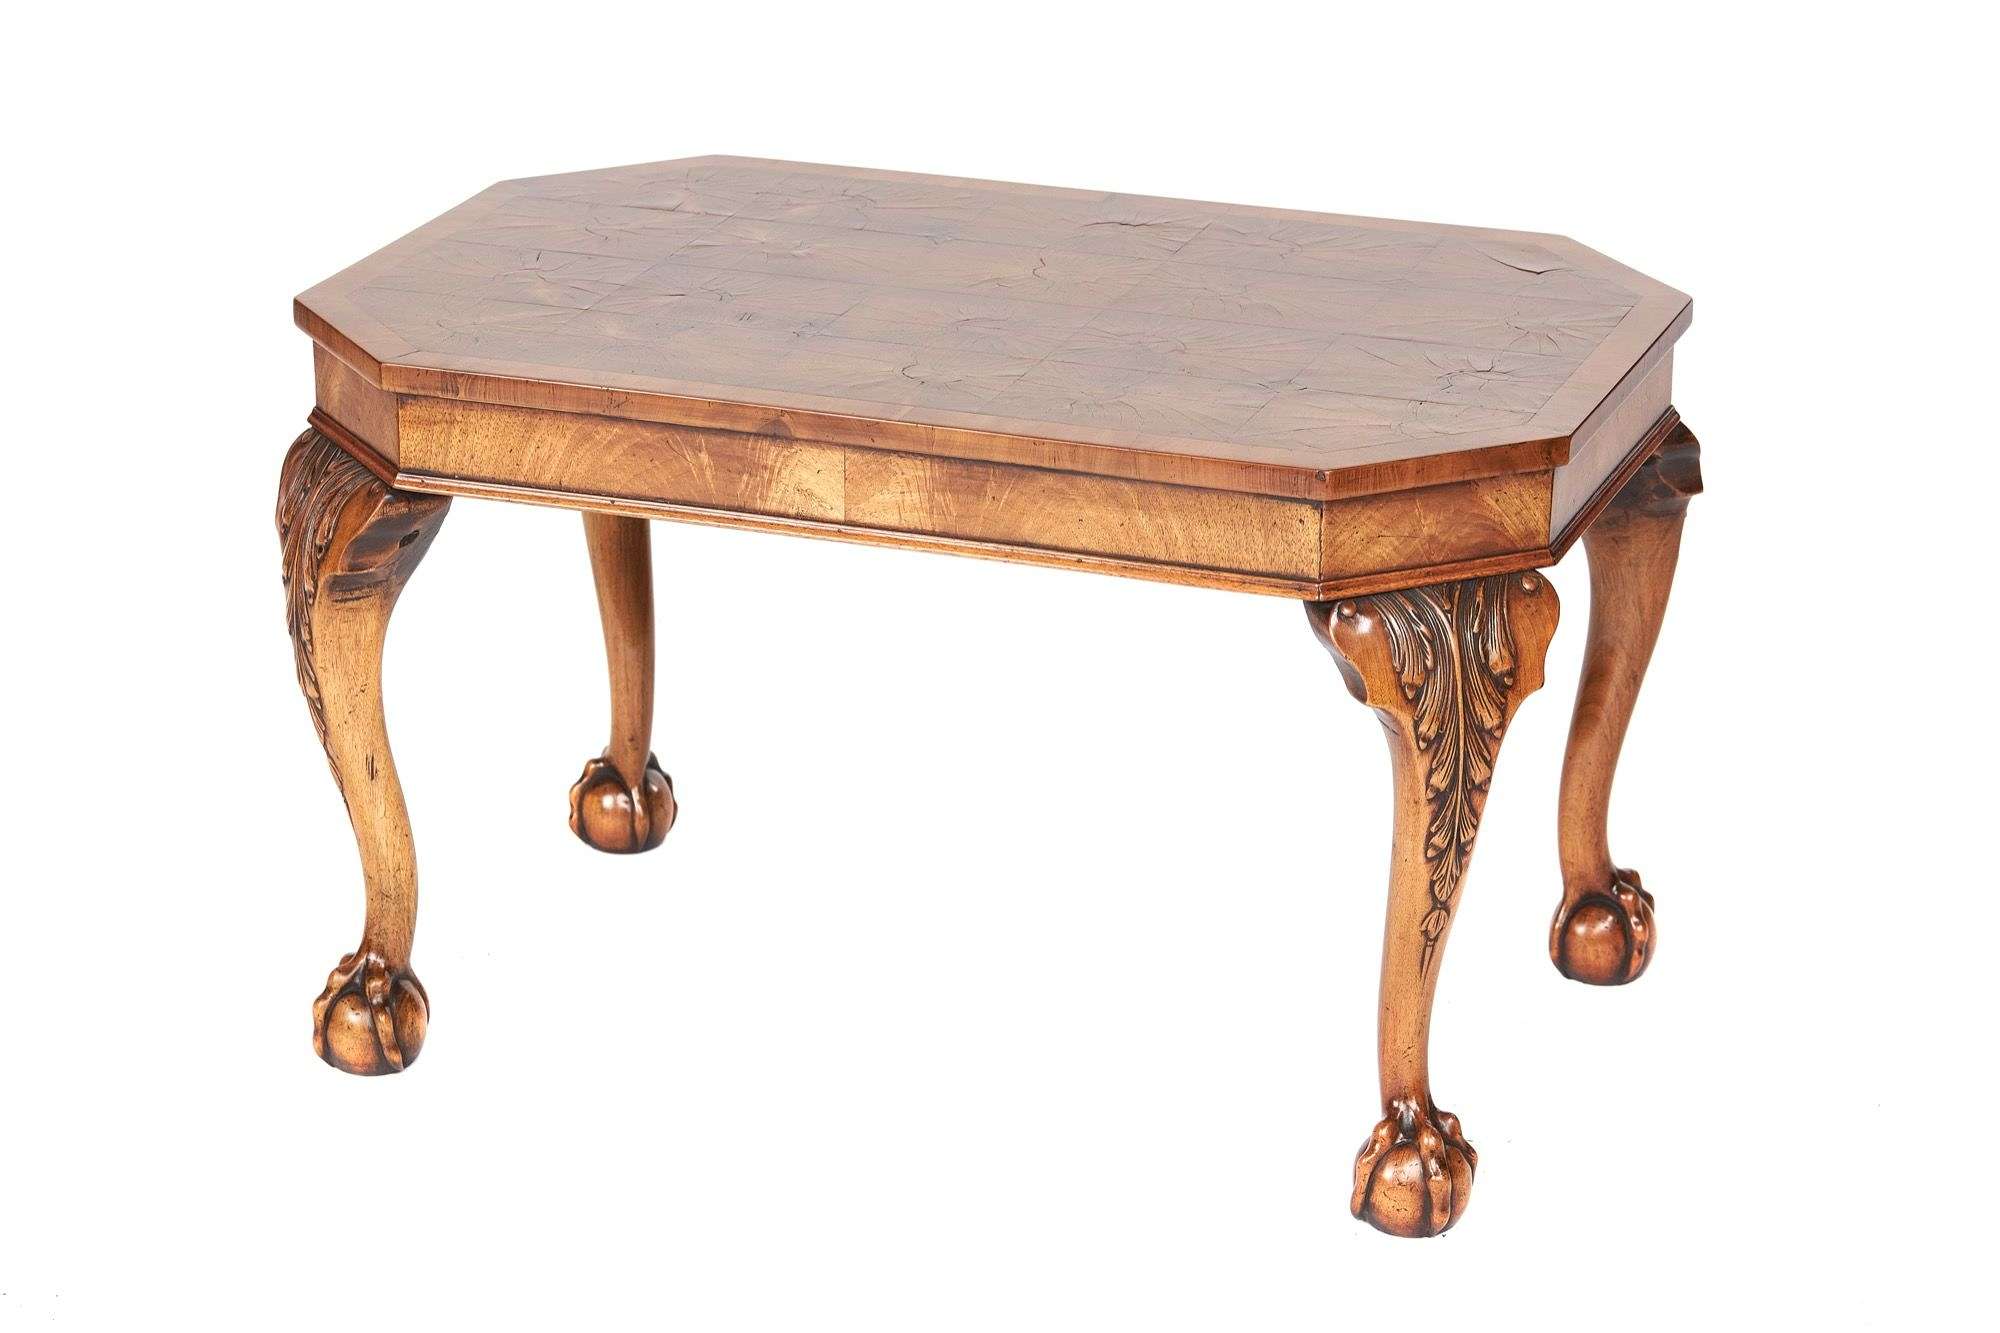 Walnut & Carved Coffee table with Oyster veneer on top circa 1920s